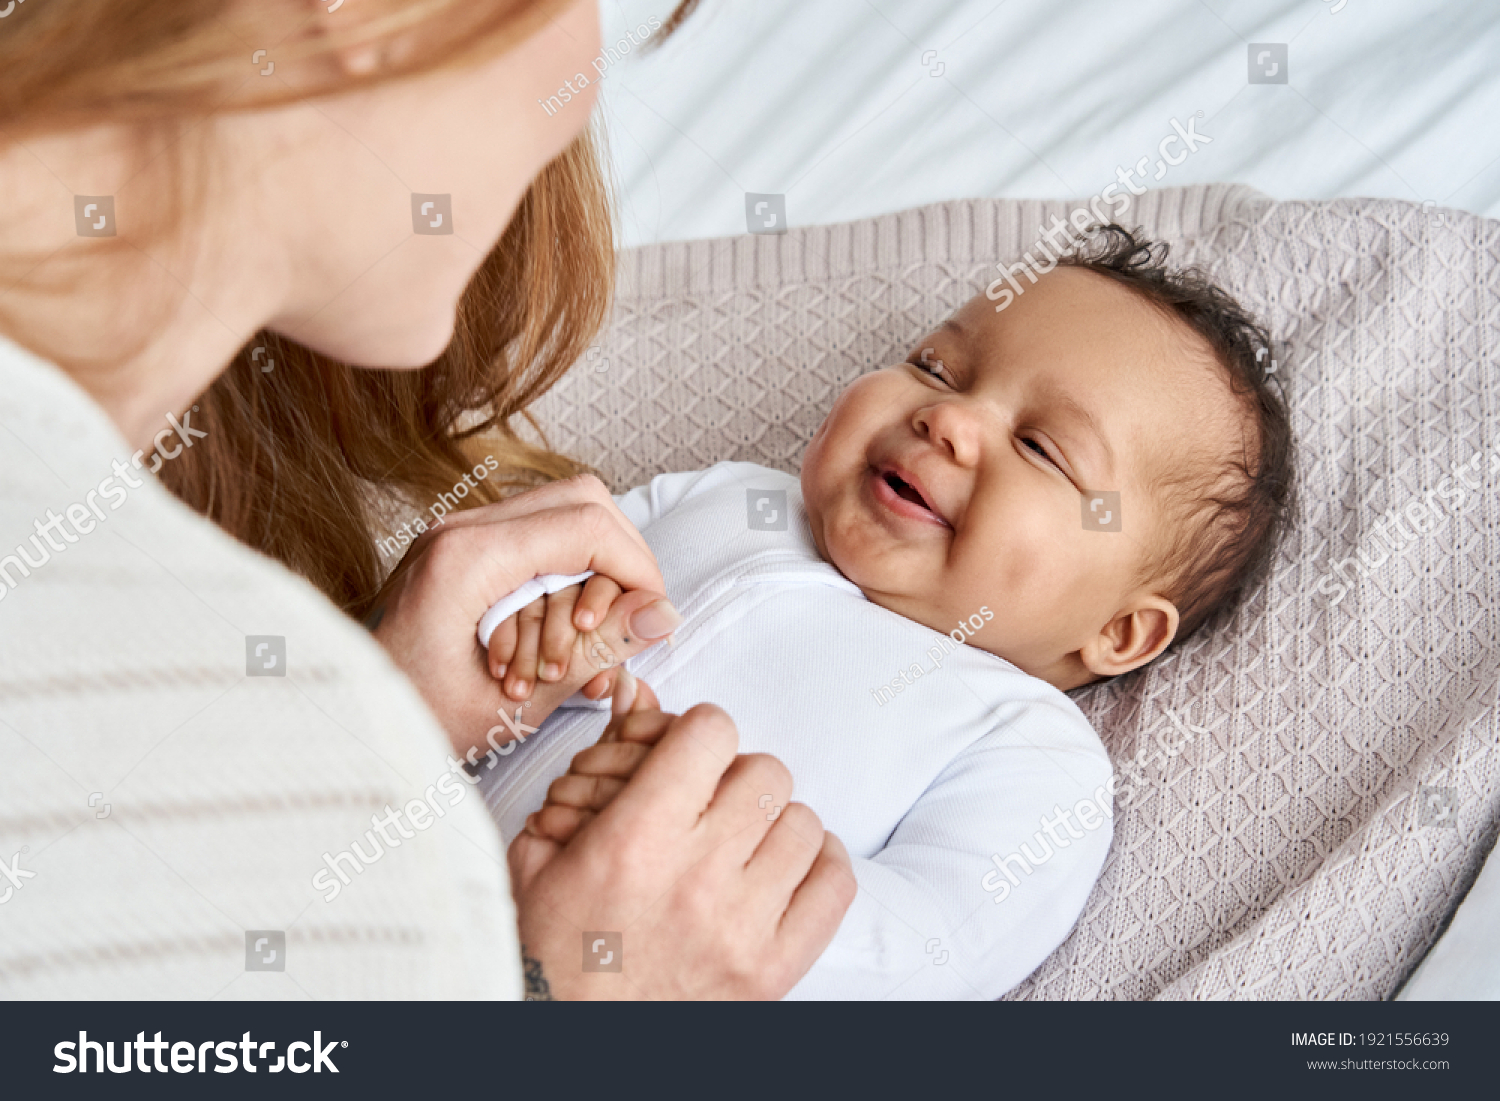 Caucasian mum, foster single parent holding hands of happy cute adorable adopted infant african american baby girl daughter lying on bed. Child care, diverse ethnicity mother and child concept. #1921556639